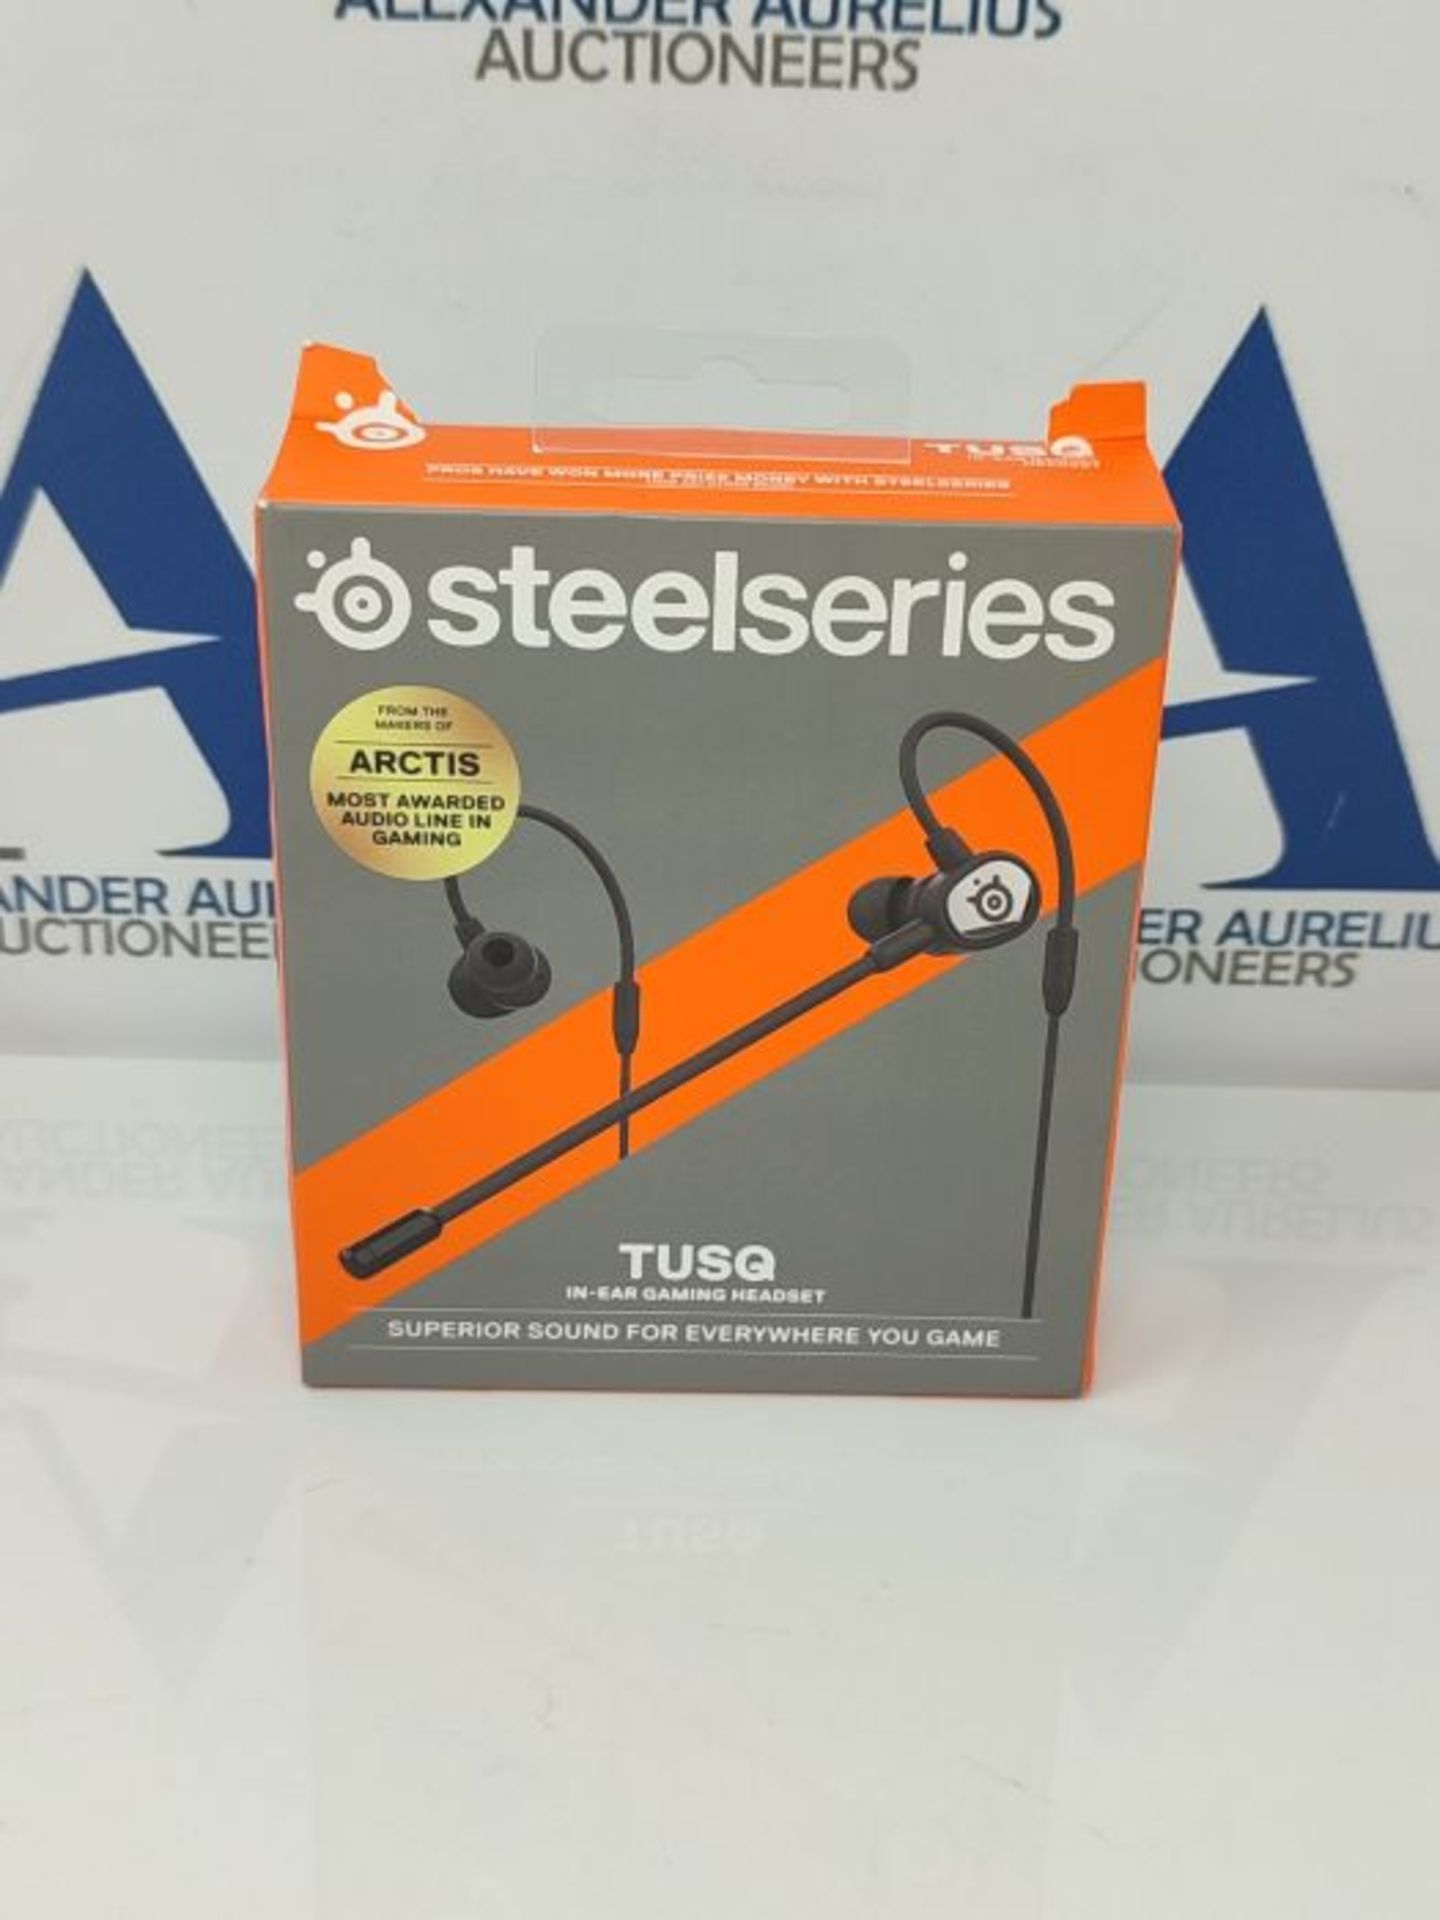 SteelSeries Tusq - In-Ear Mobile Gaming Headset - Dual Microphone With Detachable Boom - Image 2 of 3